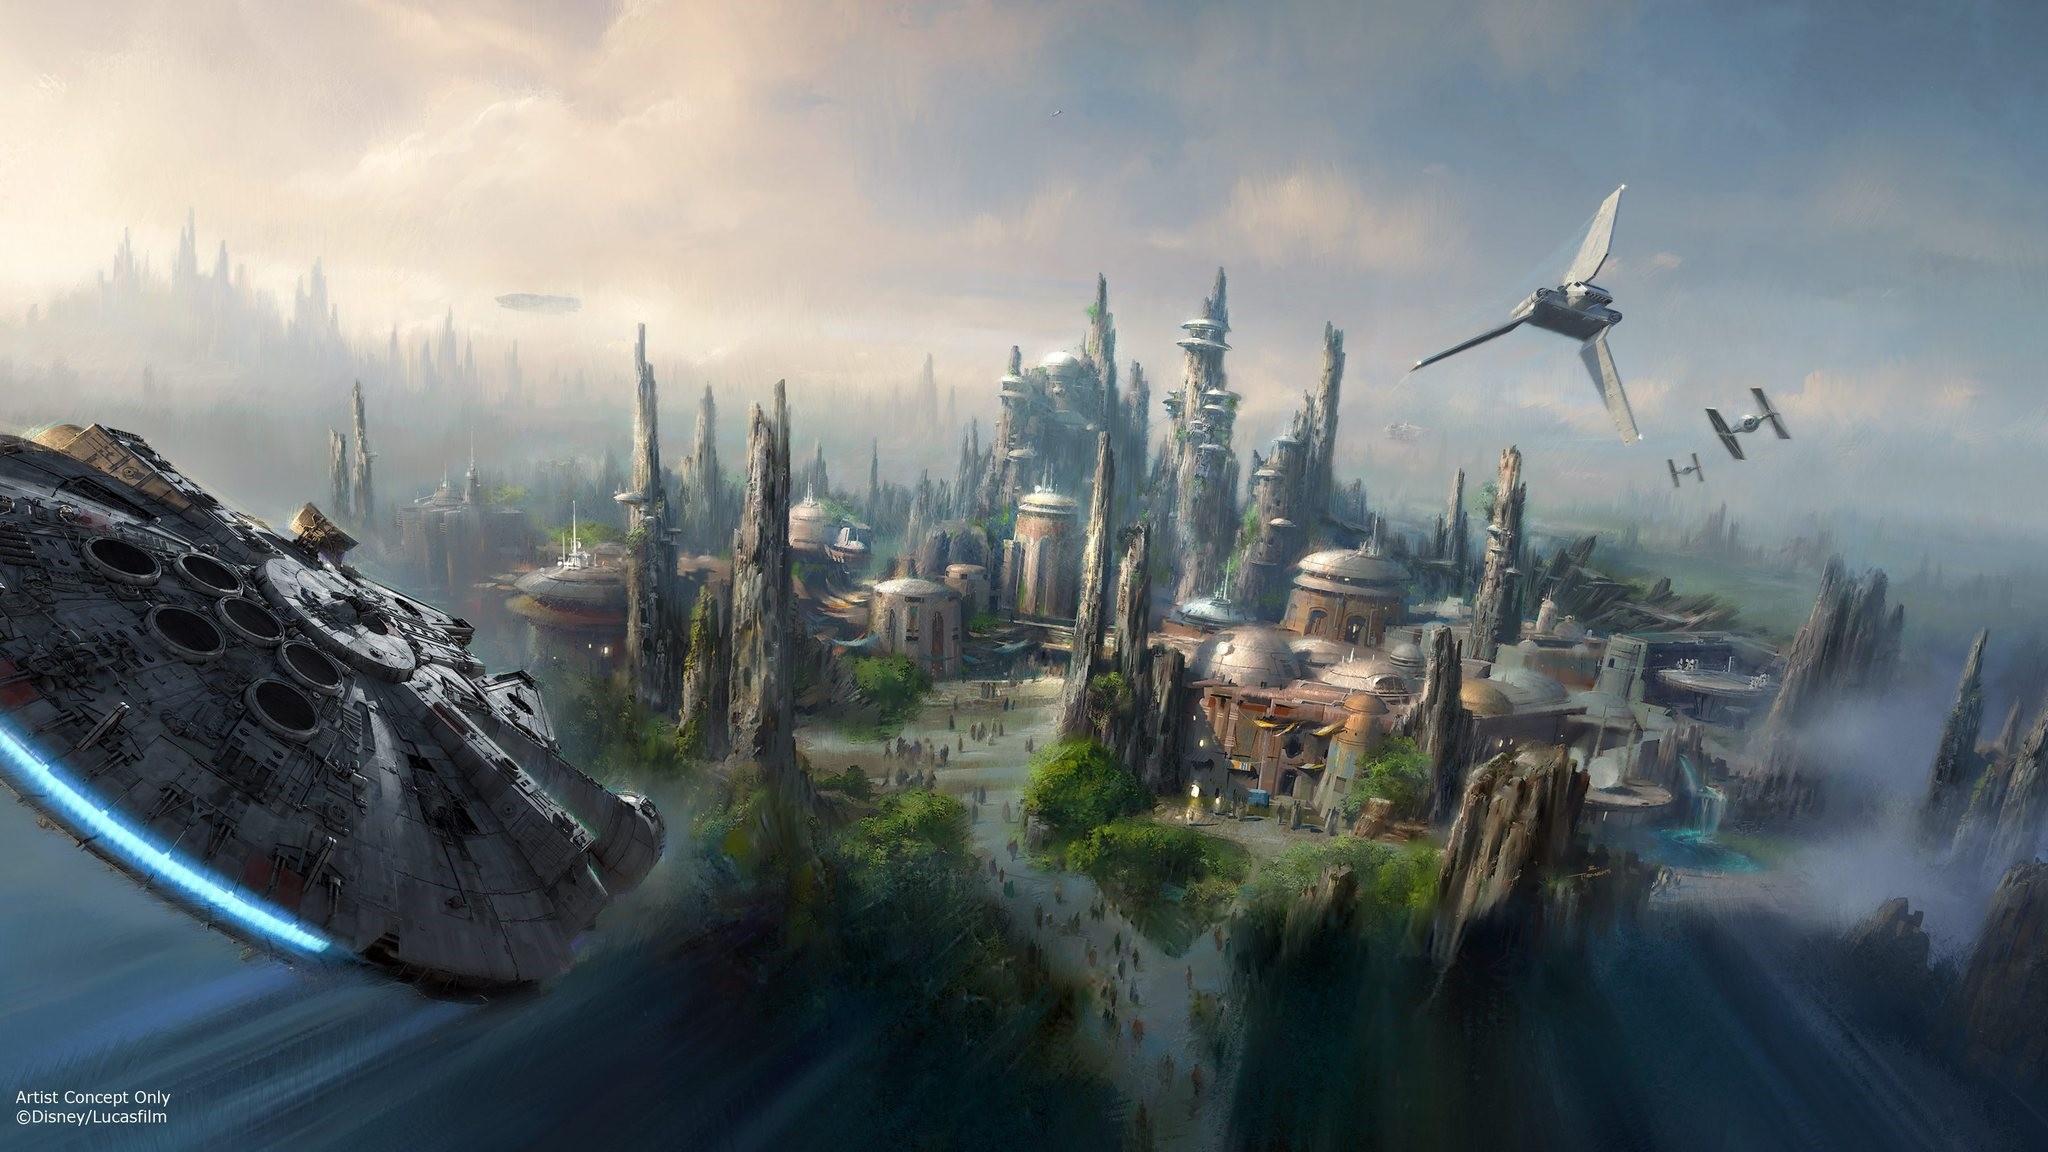 This image provided by Disney parks shows the Star Wars-themed lands will be coming to Disneyland park in California and Disneyu2019s Hollywood Studios in Orlando. (AP Photo)